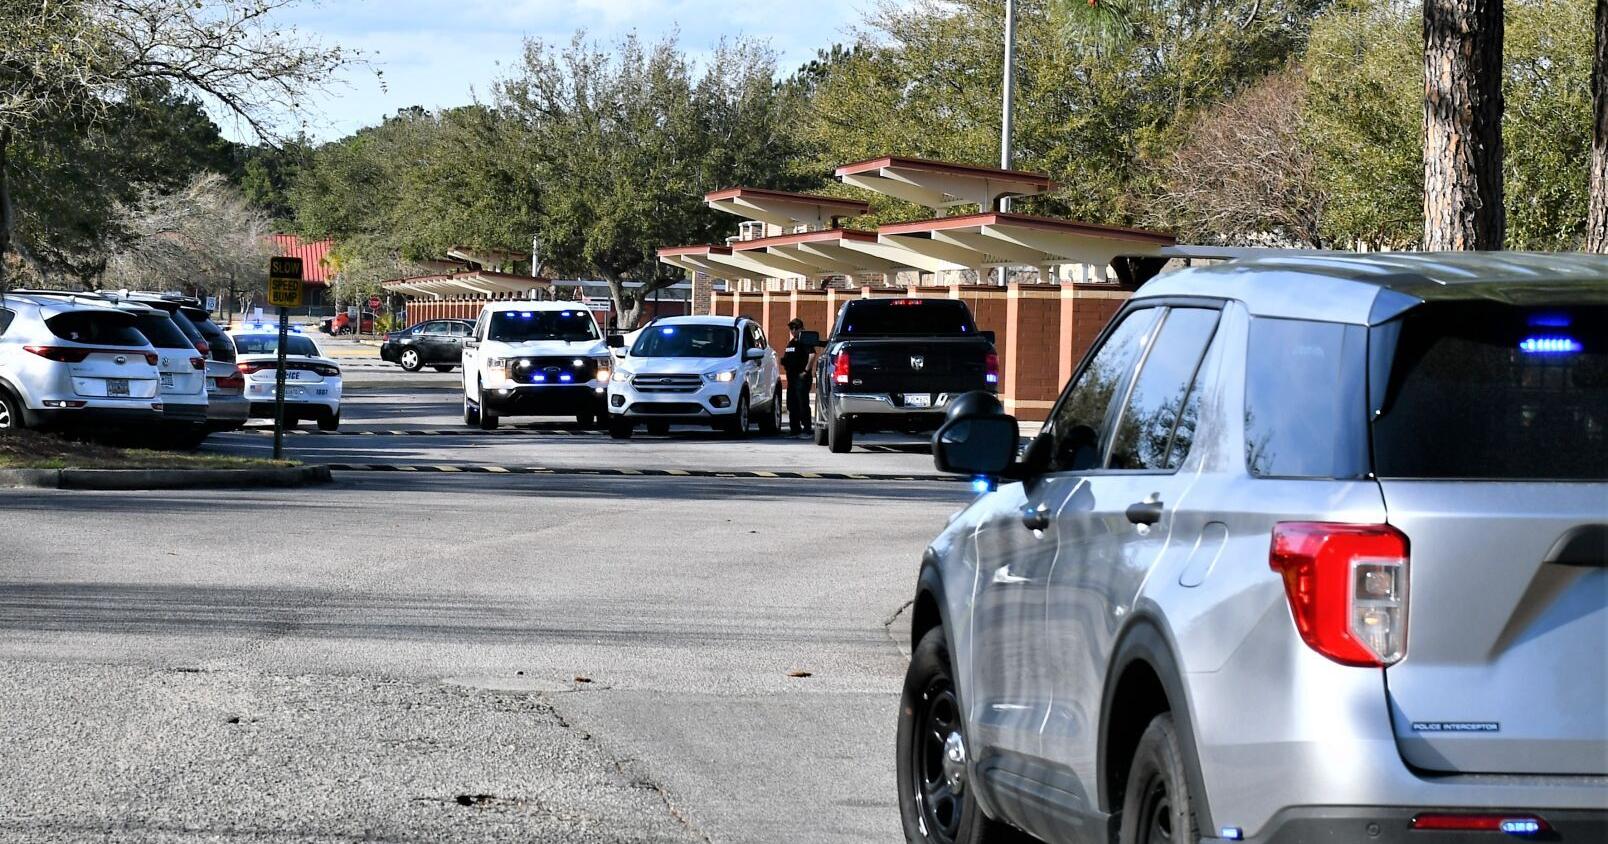 More police activity at West View Schools in Goose Creek